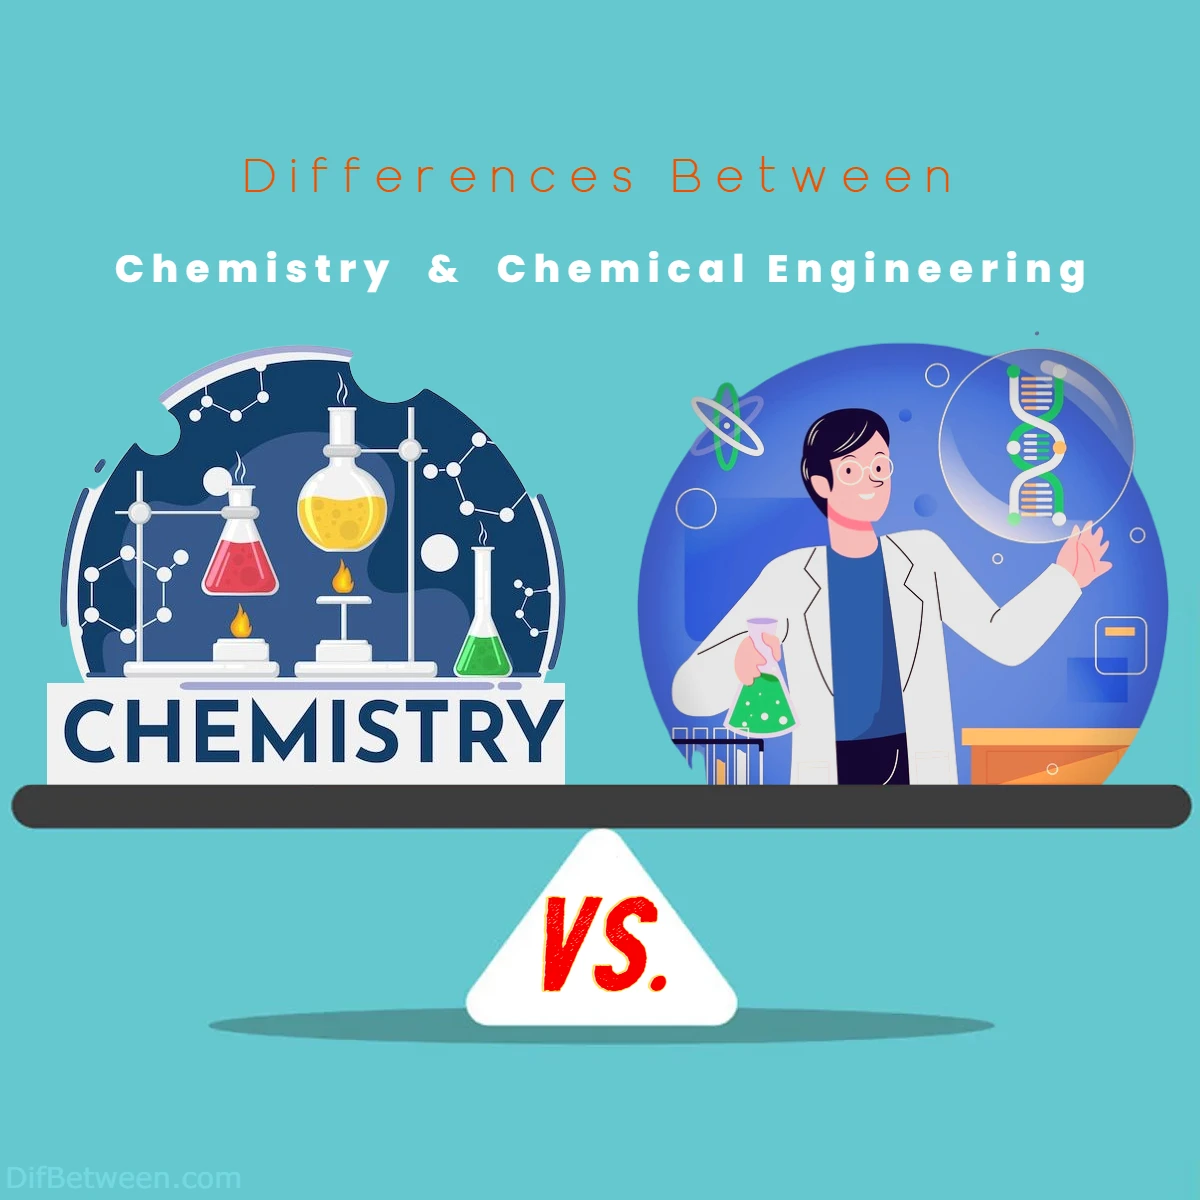 Differences Between Chemistry vs Chemical Engineering